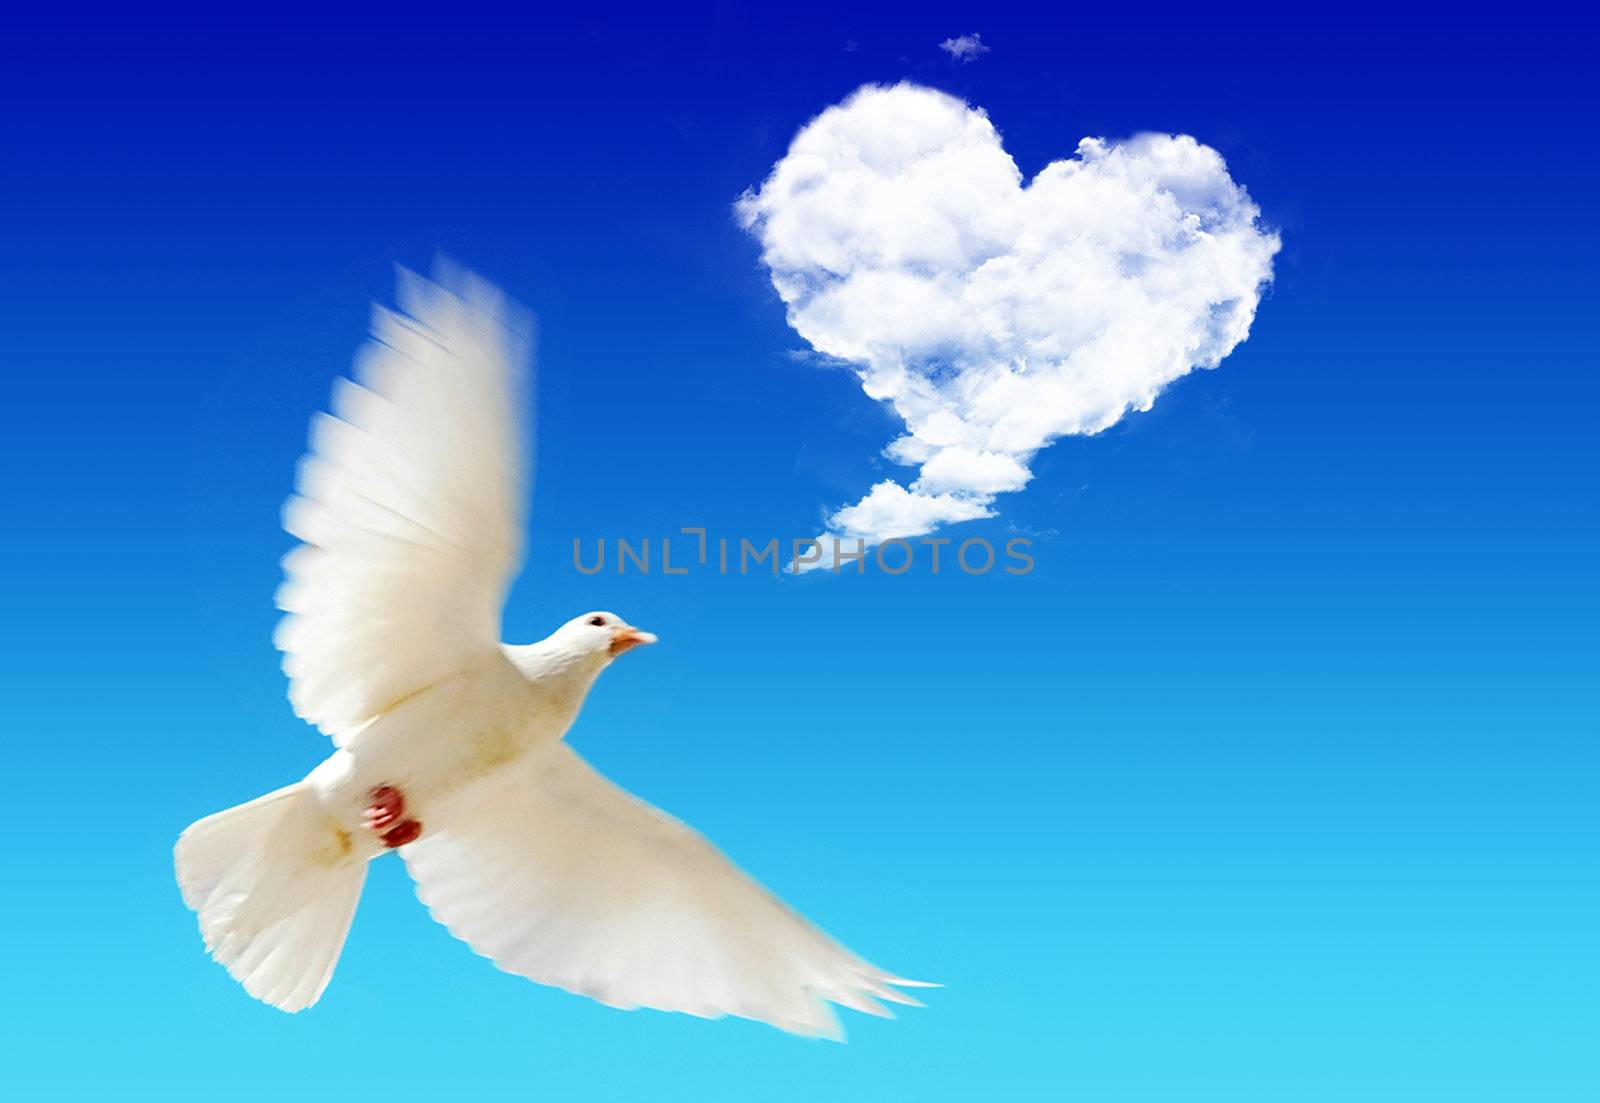 Flying pigeon in the blue sky with a sky heart